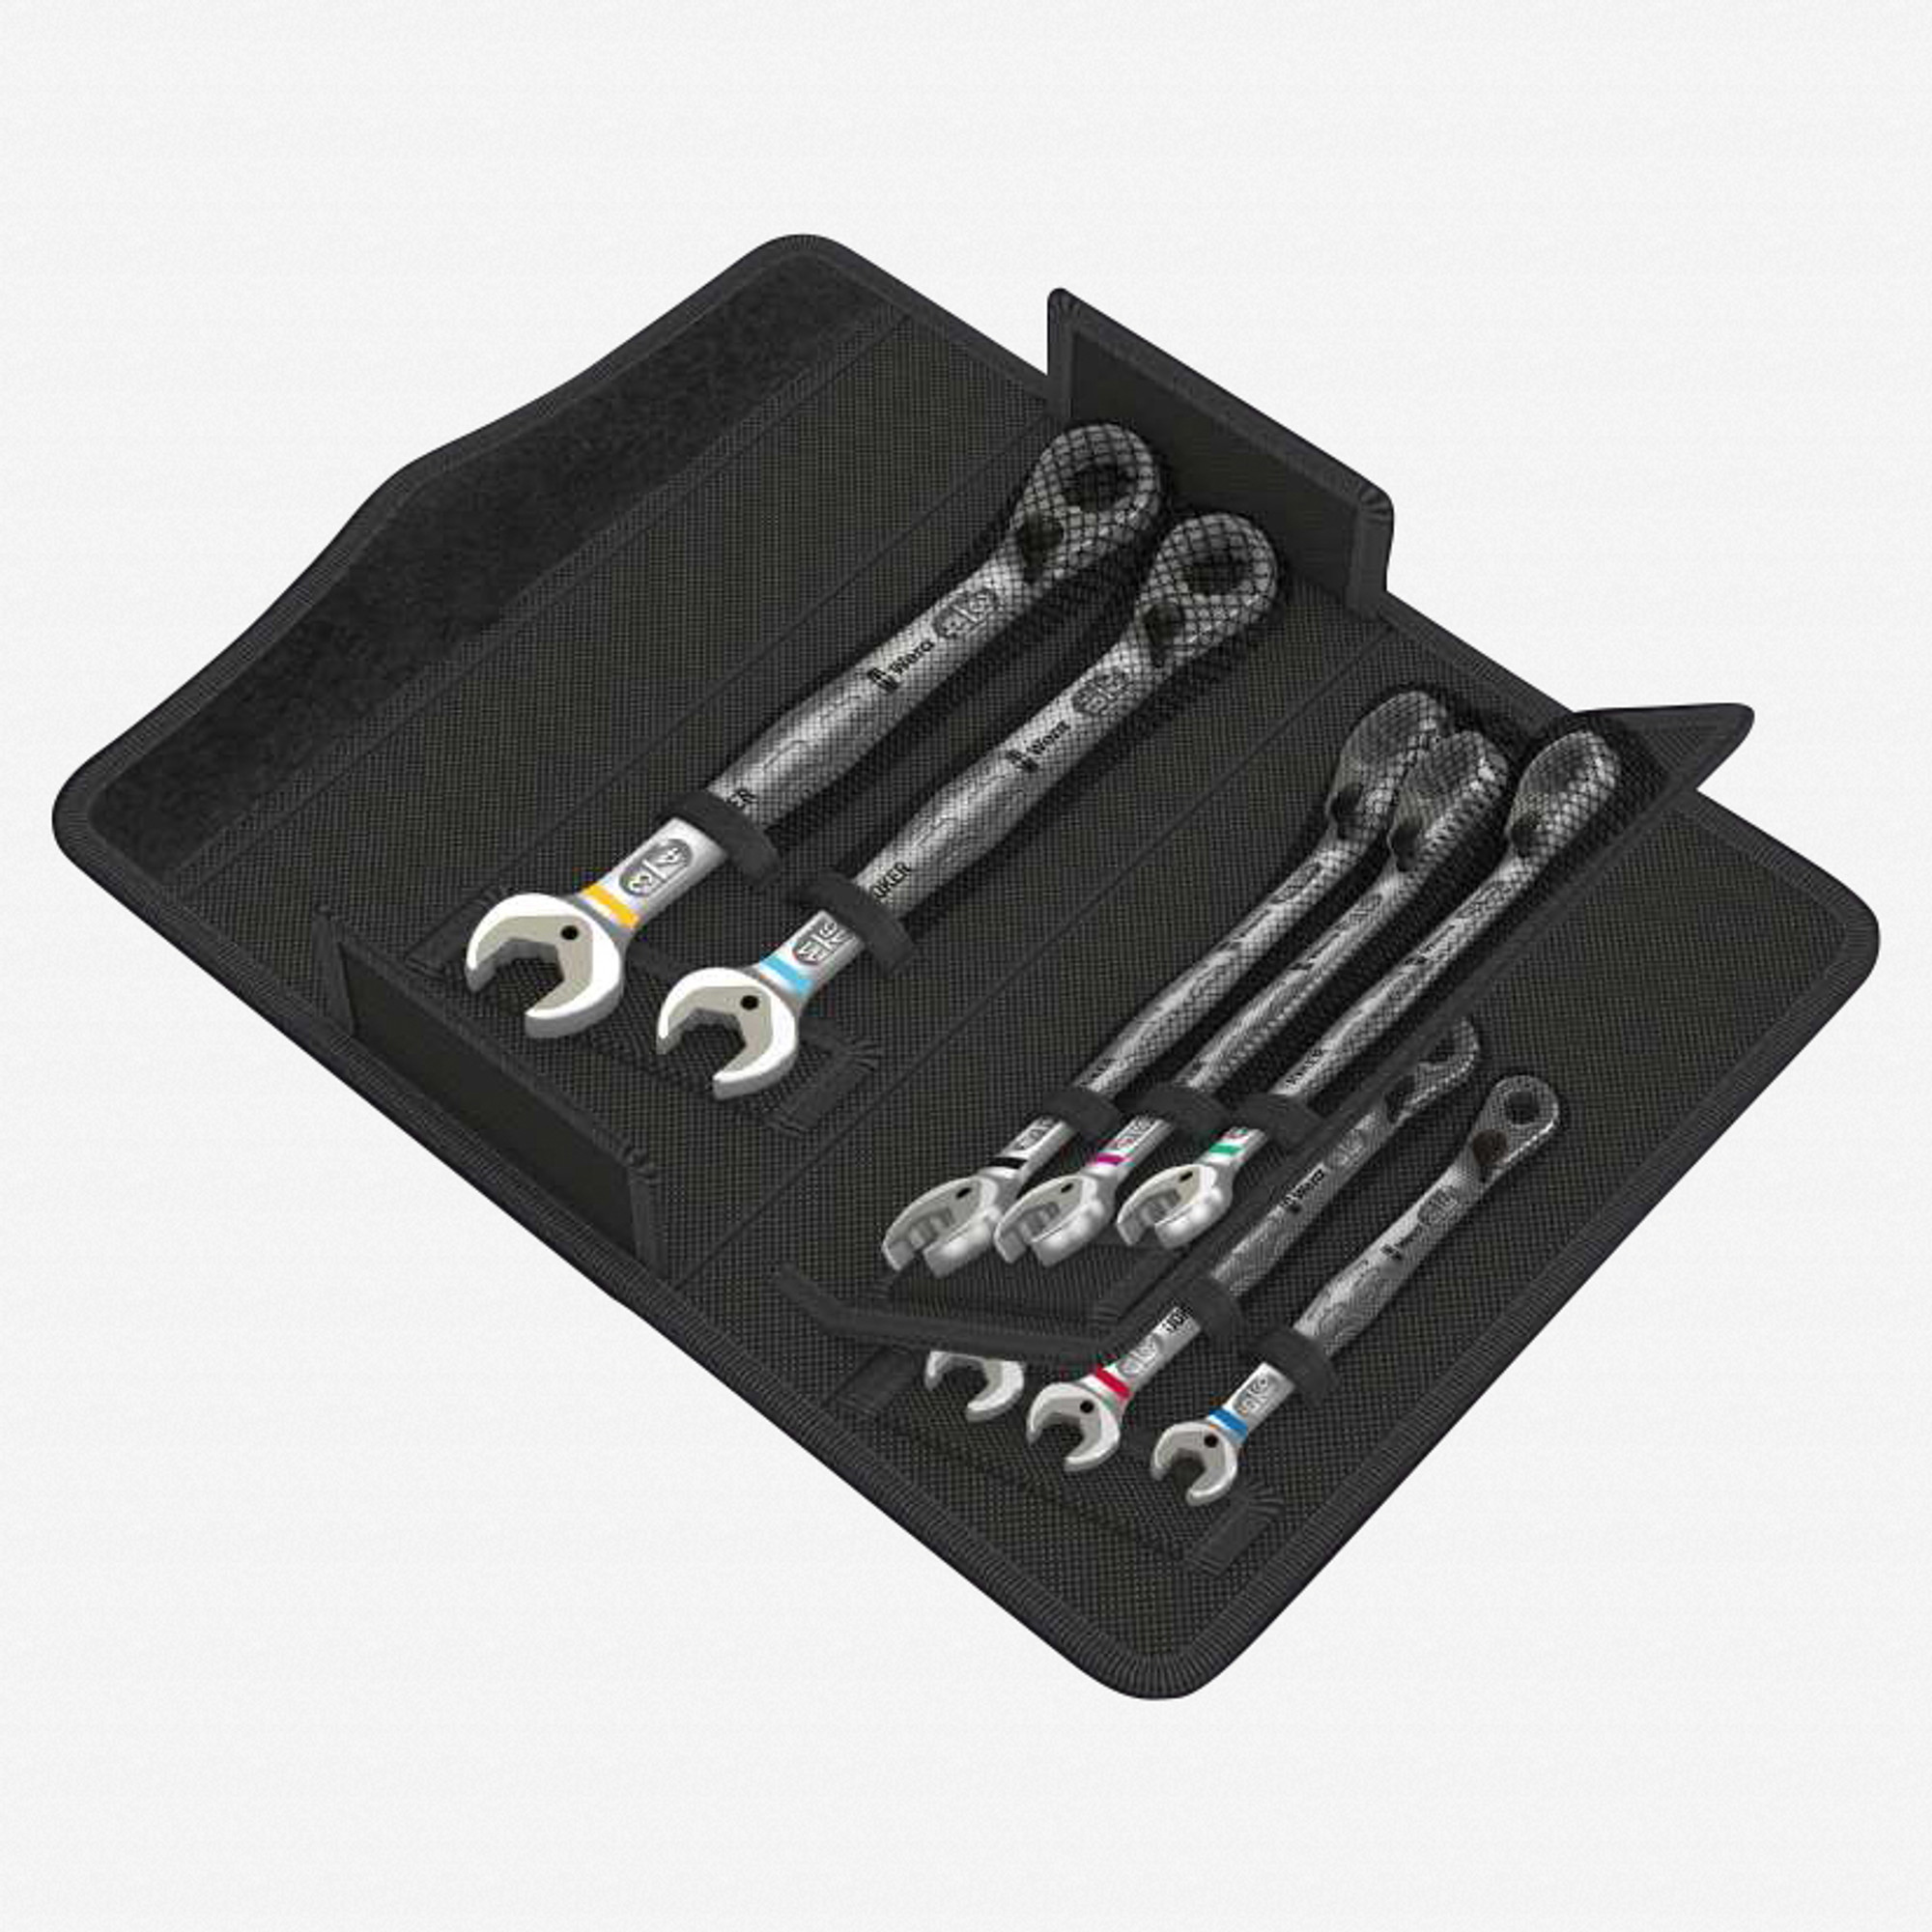 Wera Tools 020093 Joker Combination Wrench with Switch 8 Piece Set